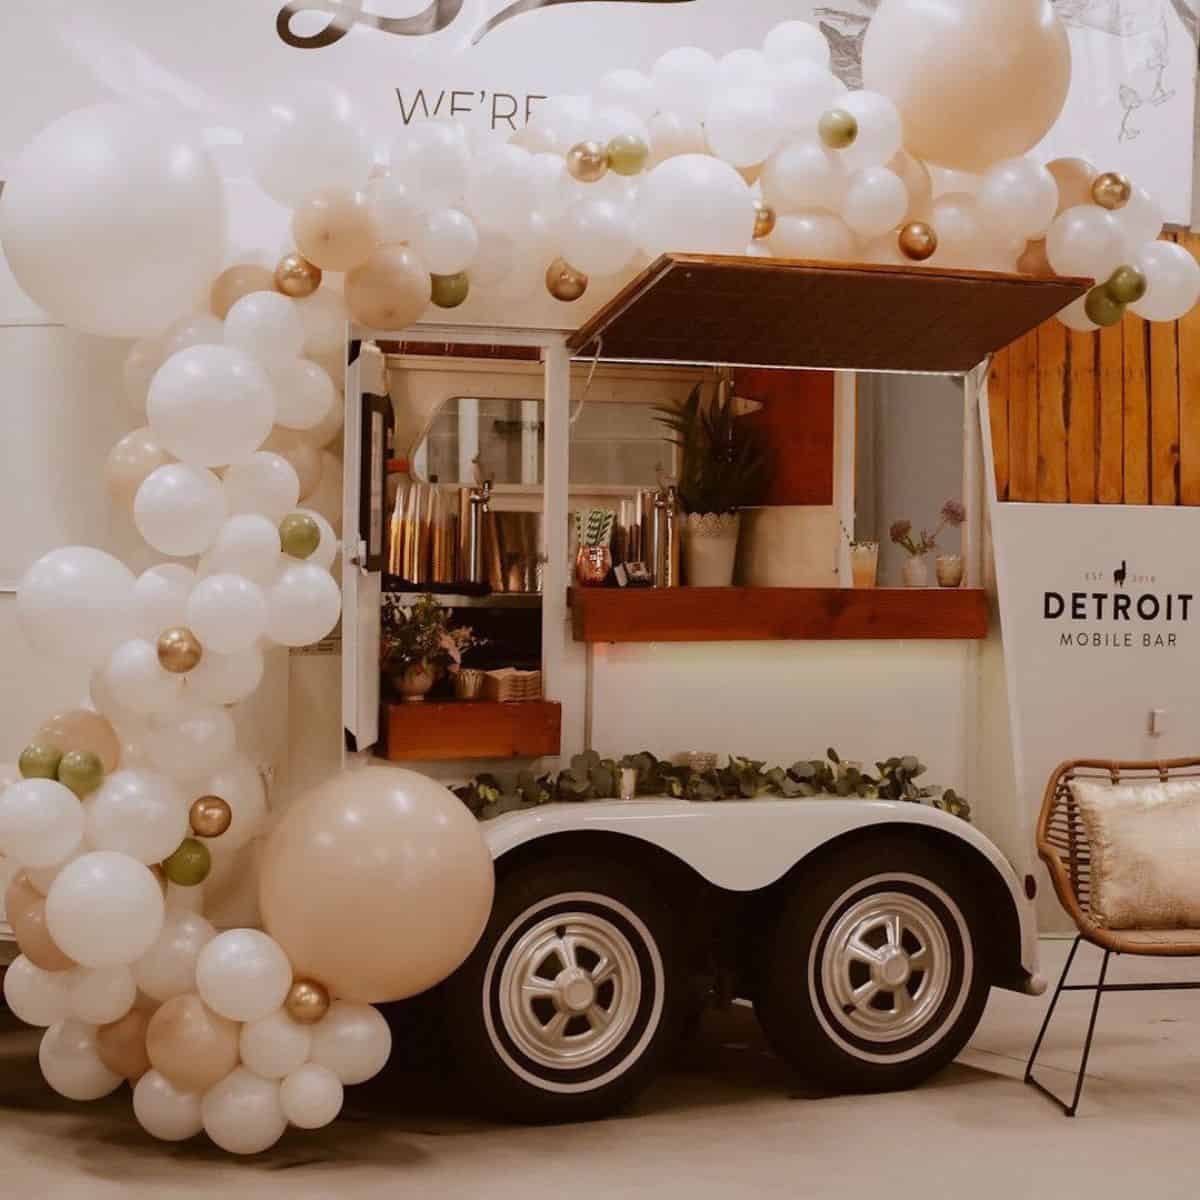 A horse trailer decorated with balloons rebuilded as a small bar.